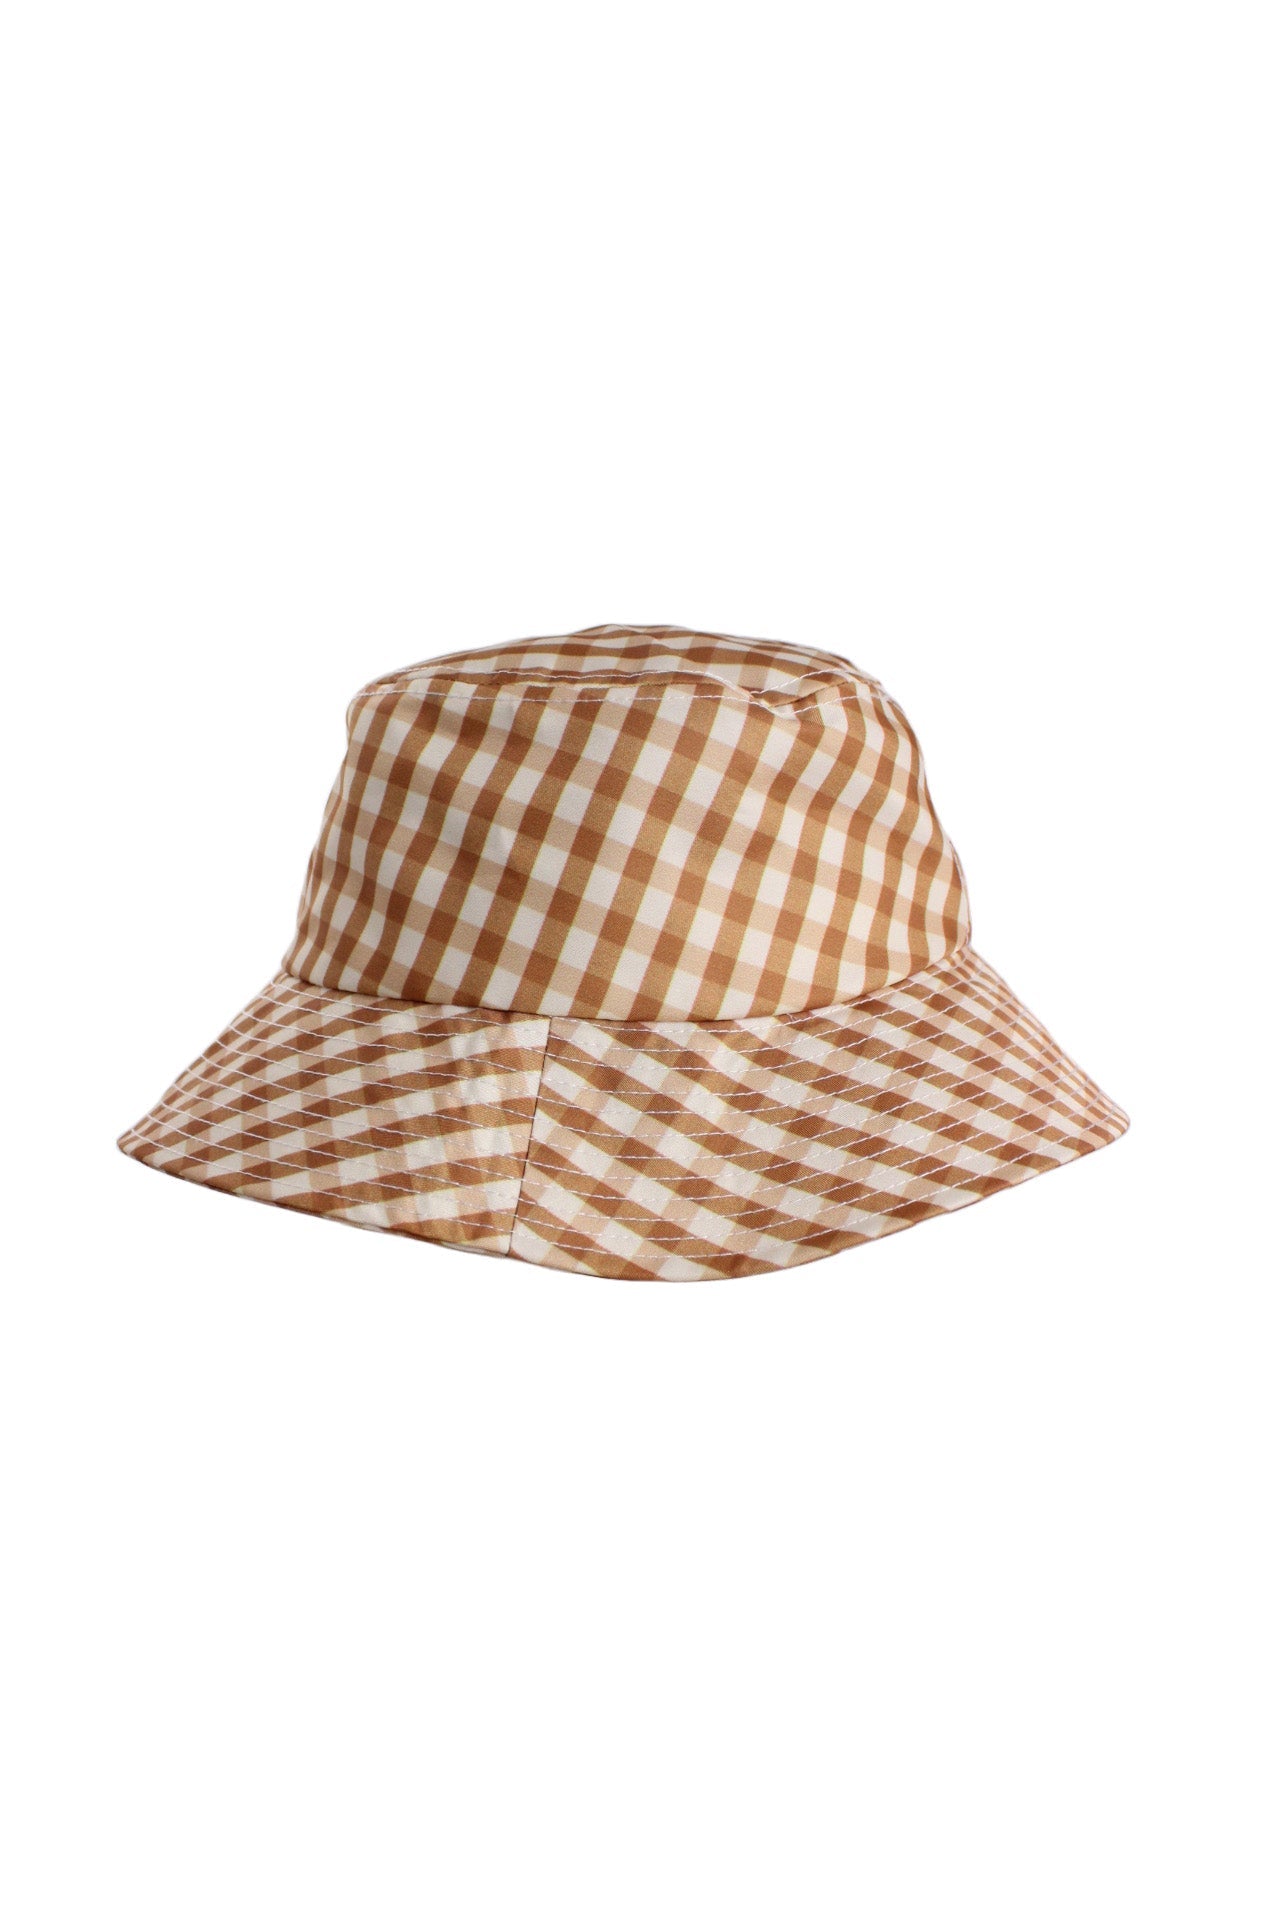 side angle of bucket hat. seam on brim where pattern does not perfectly match up. 